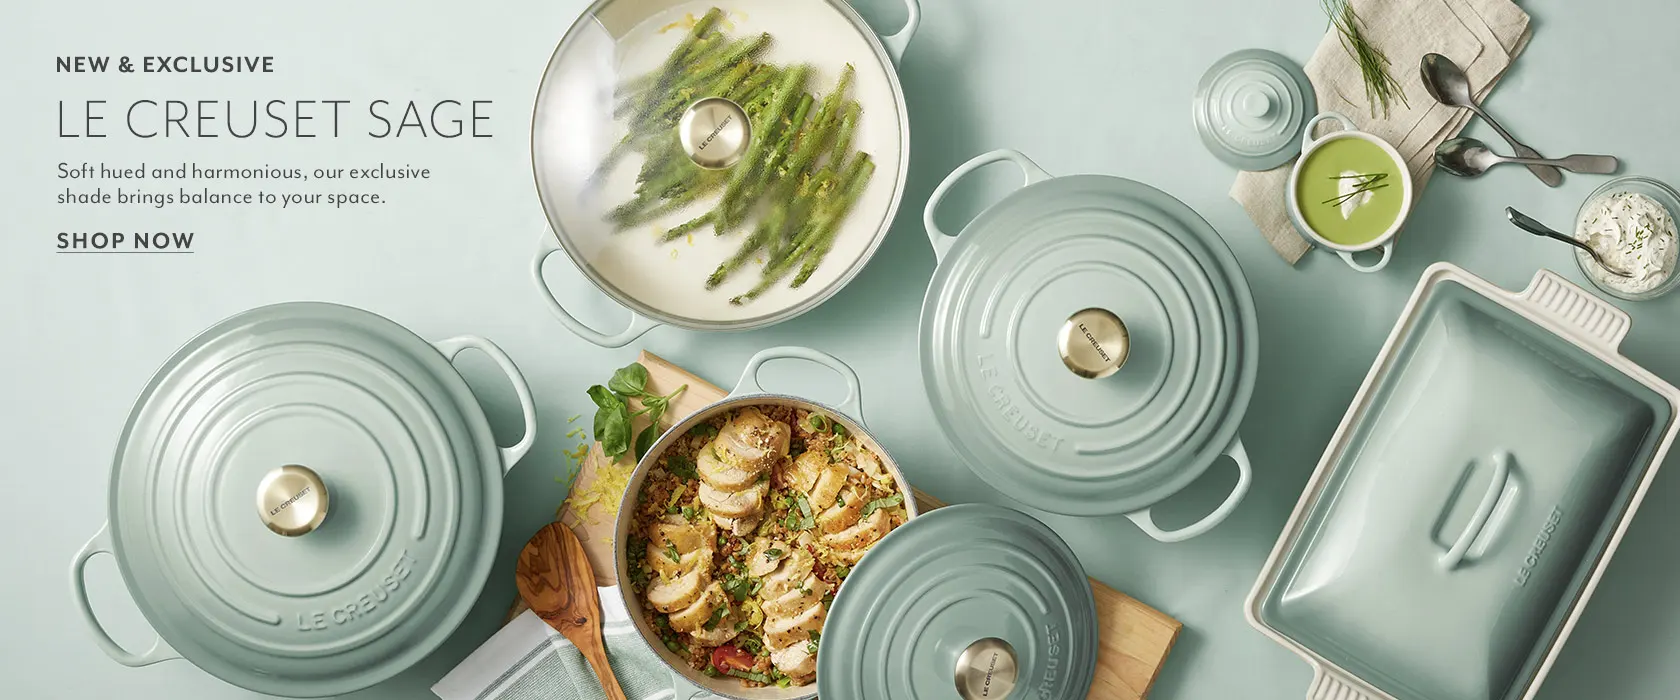 New & Exclusive Le Creuset Sage. Soft hued and harmonious, our exclusive shade brings balance to your space. Shop Now.